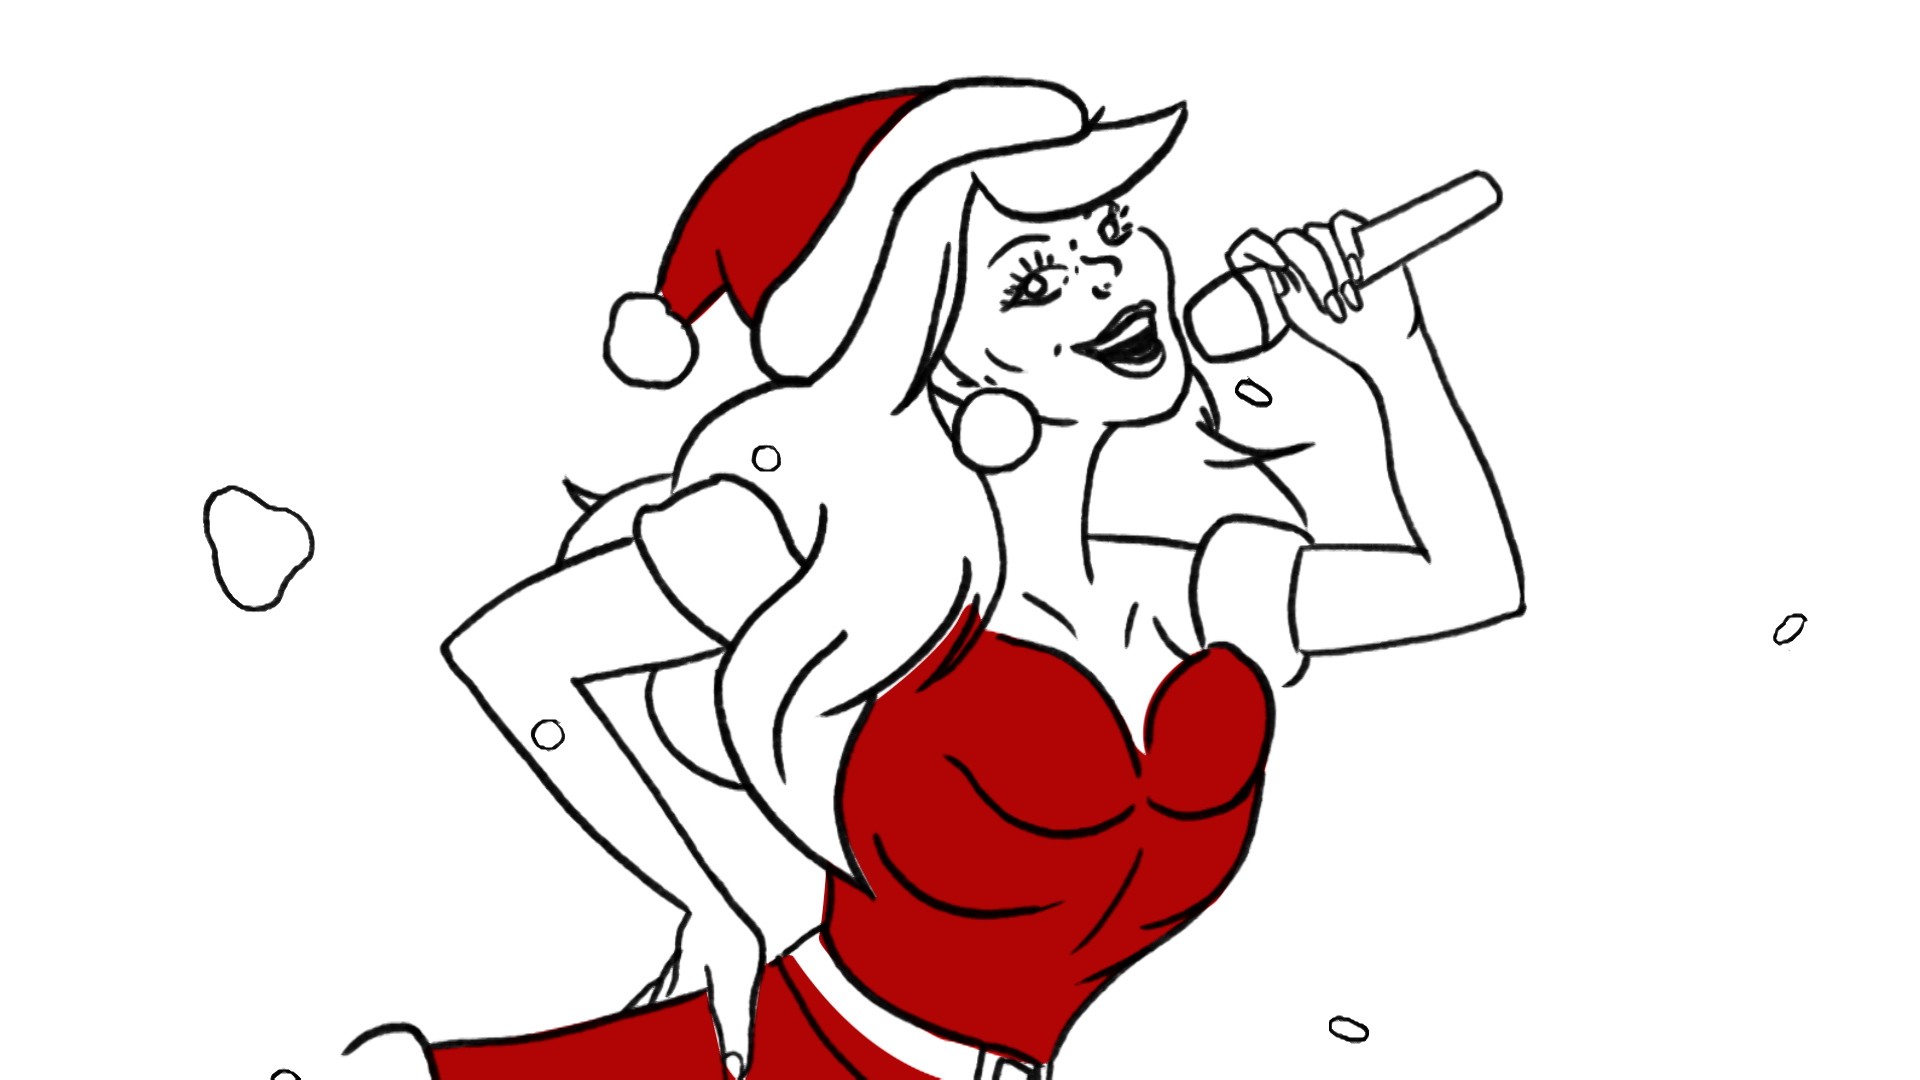 Mariah Carey Fashion Sketch All I Want for Christmas is You 